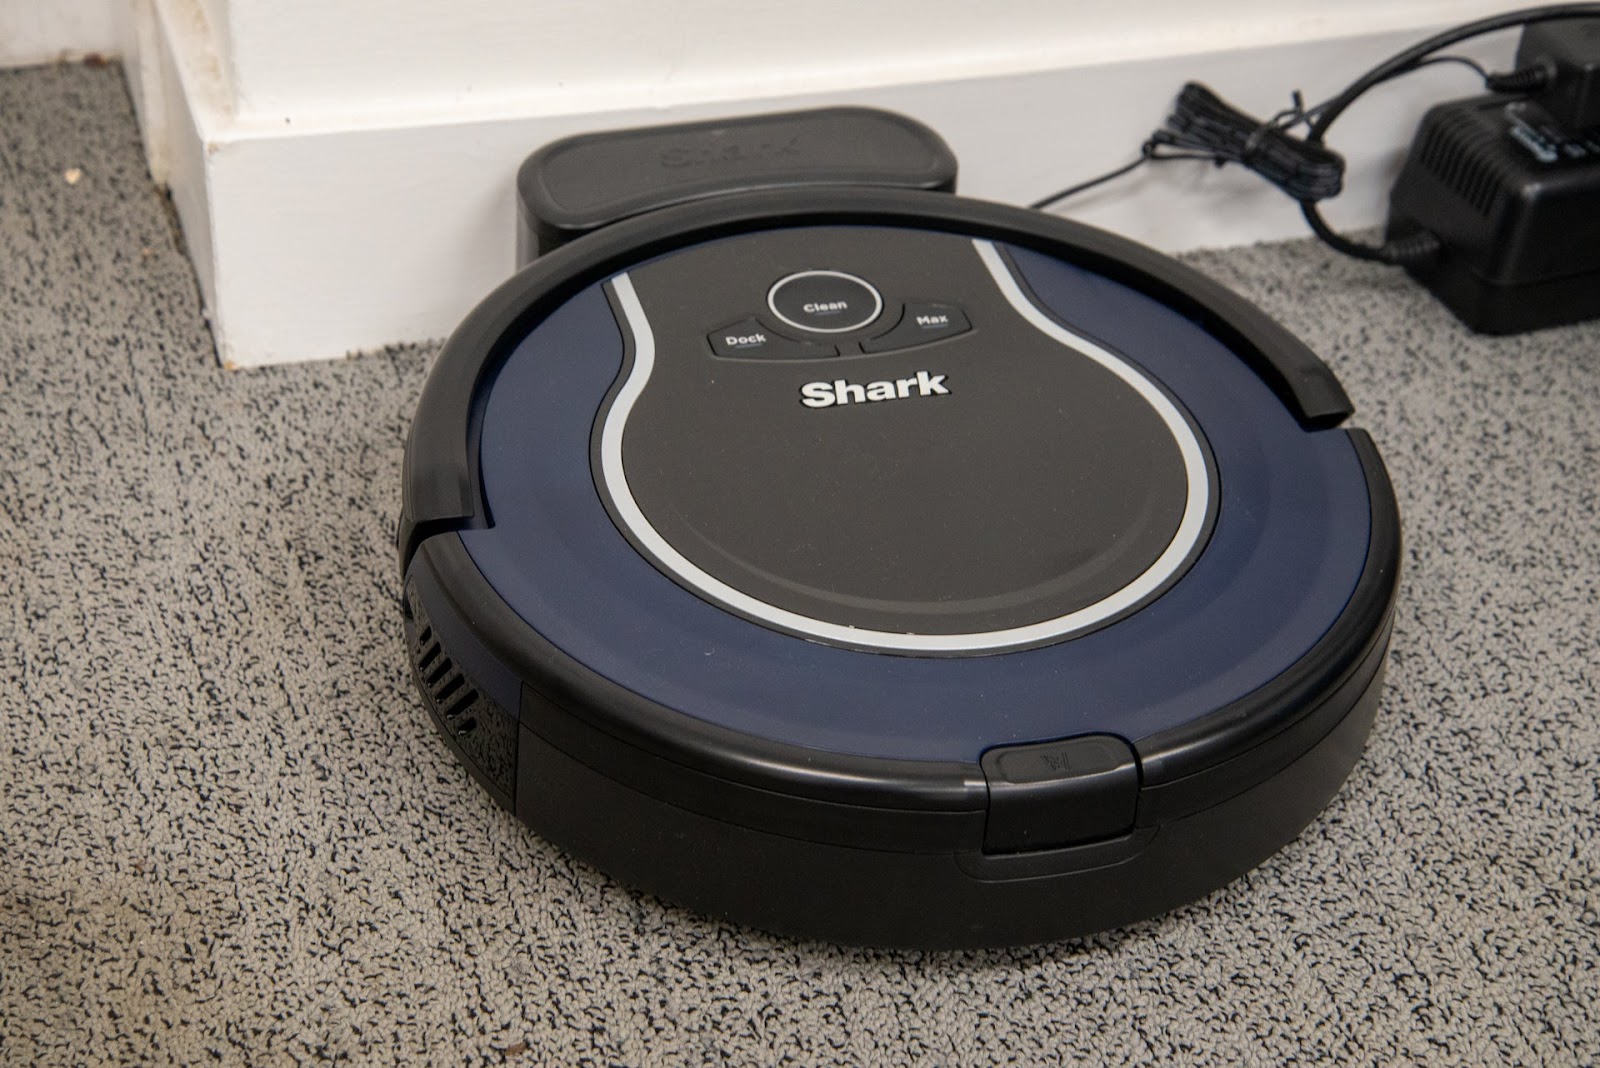 How To Connect Shark Robot To Wifi